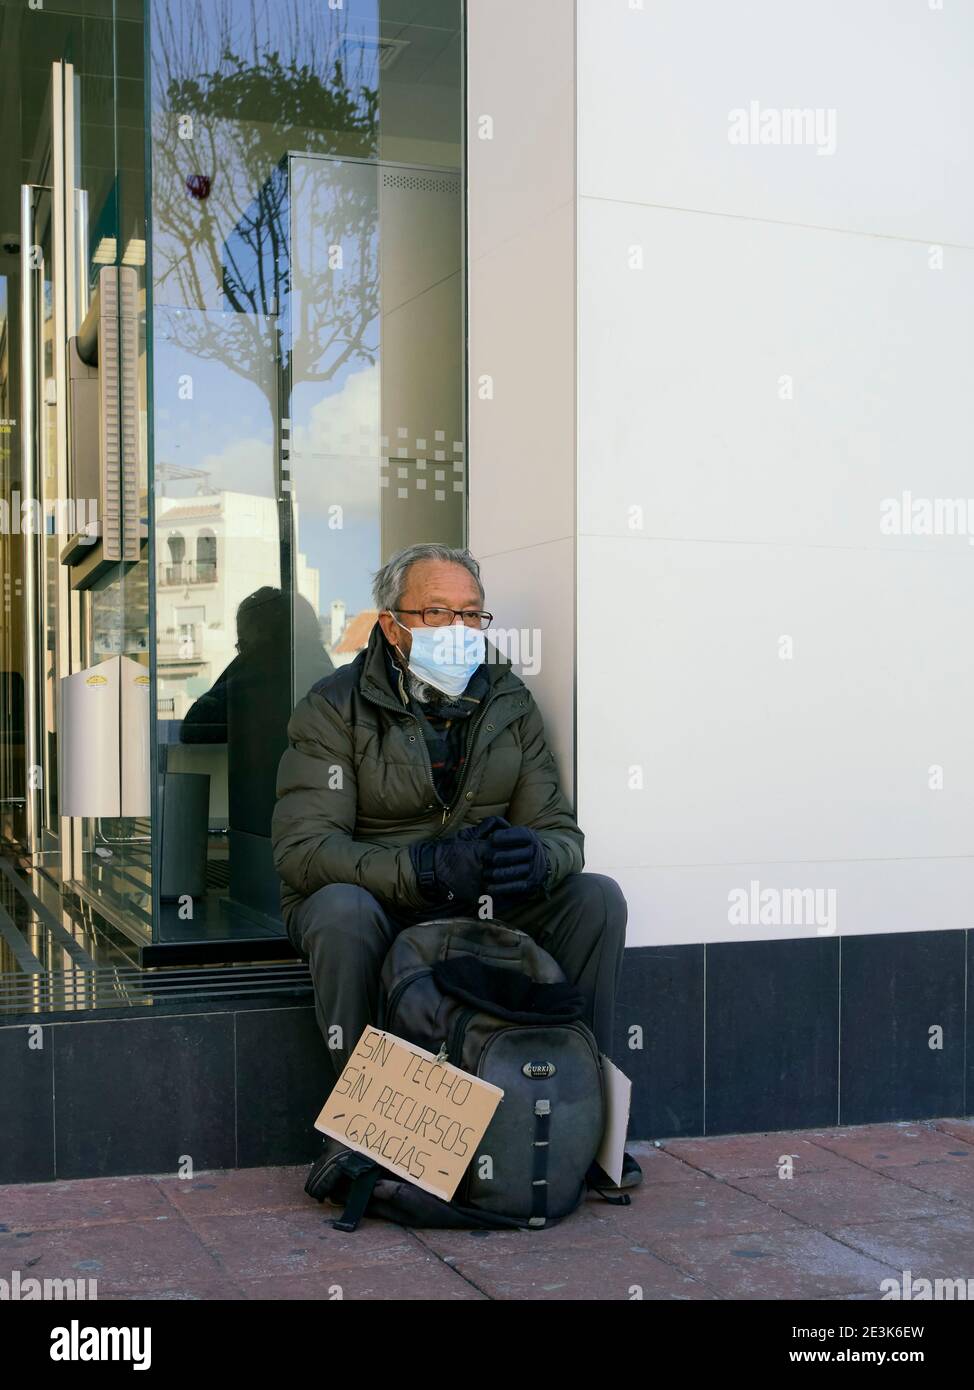 An elderly homeless Spanish man wearing a surgical mask begs outside a bank during the Corornavirus pandemic, Nerja, Malaga, Spain Stock Photo